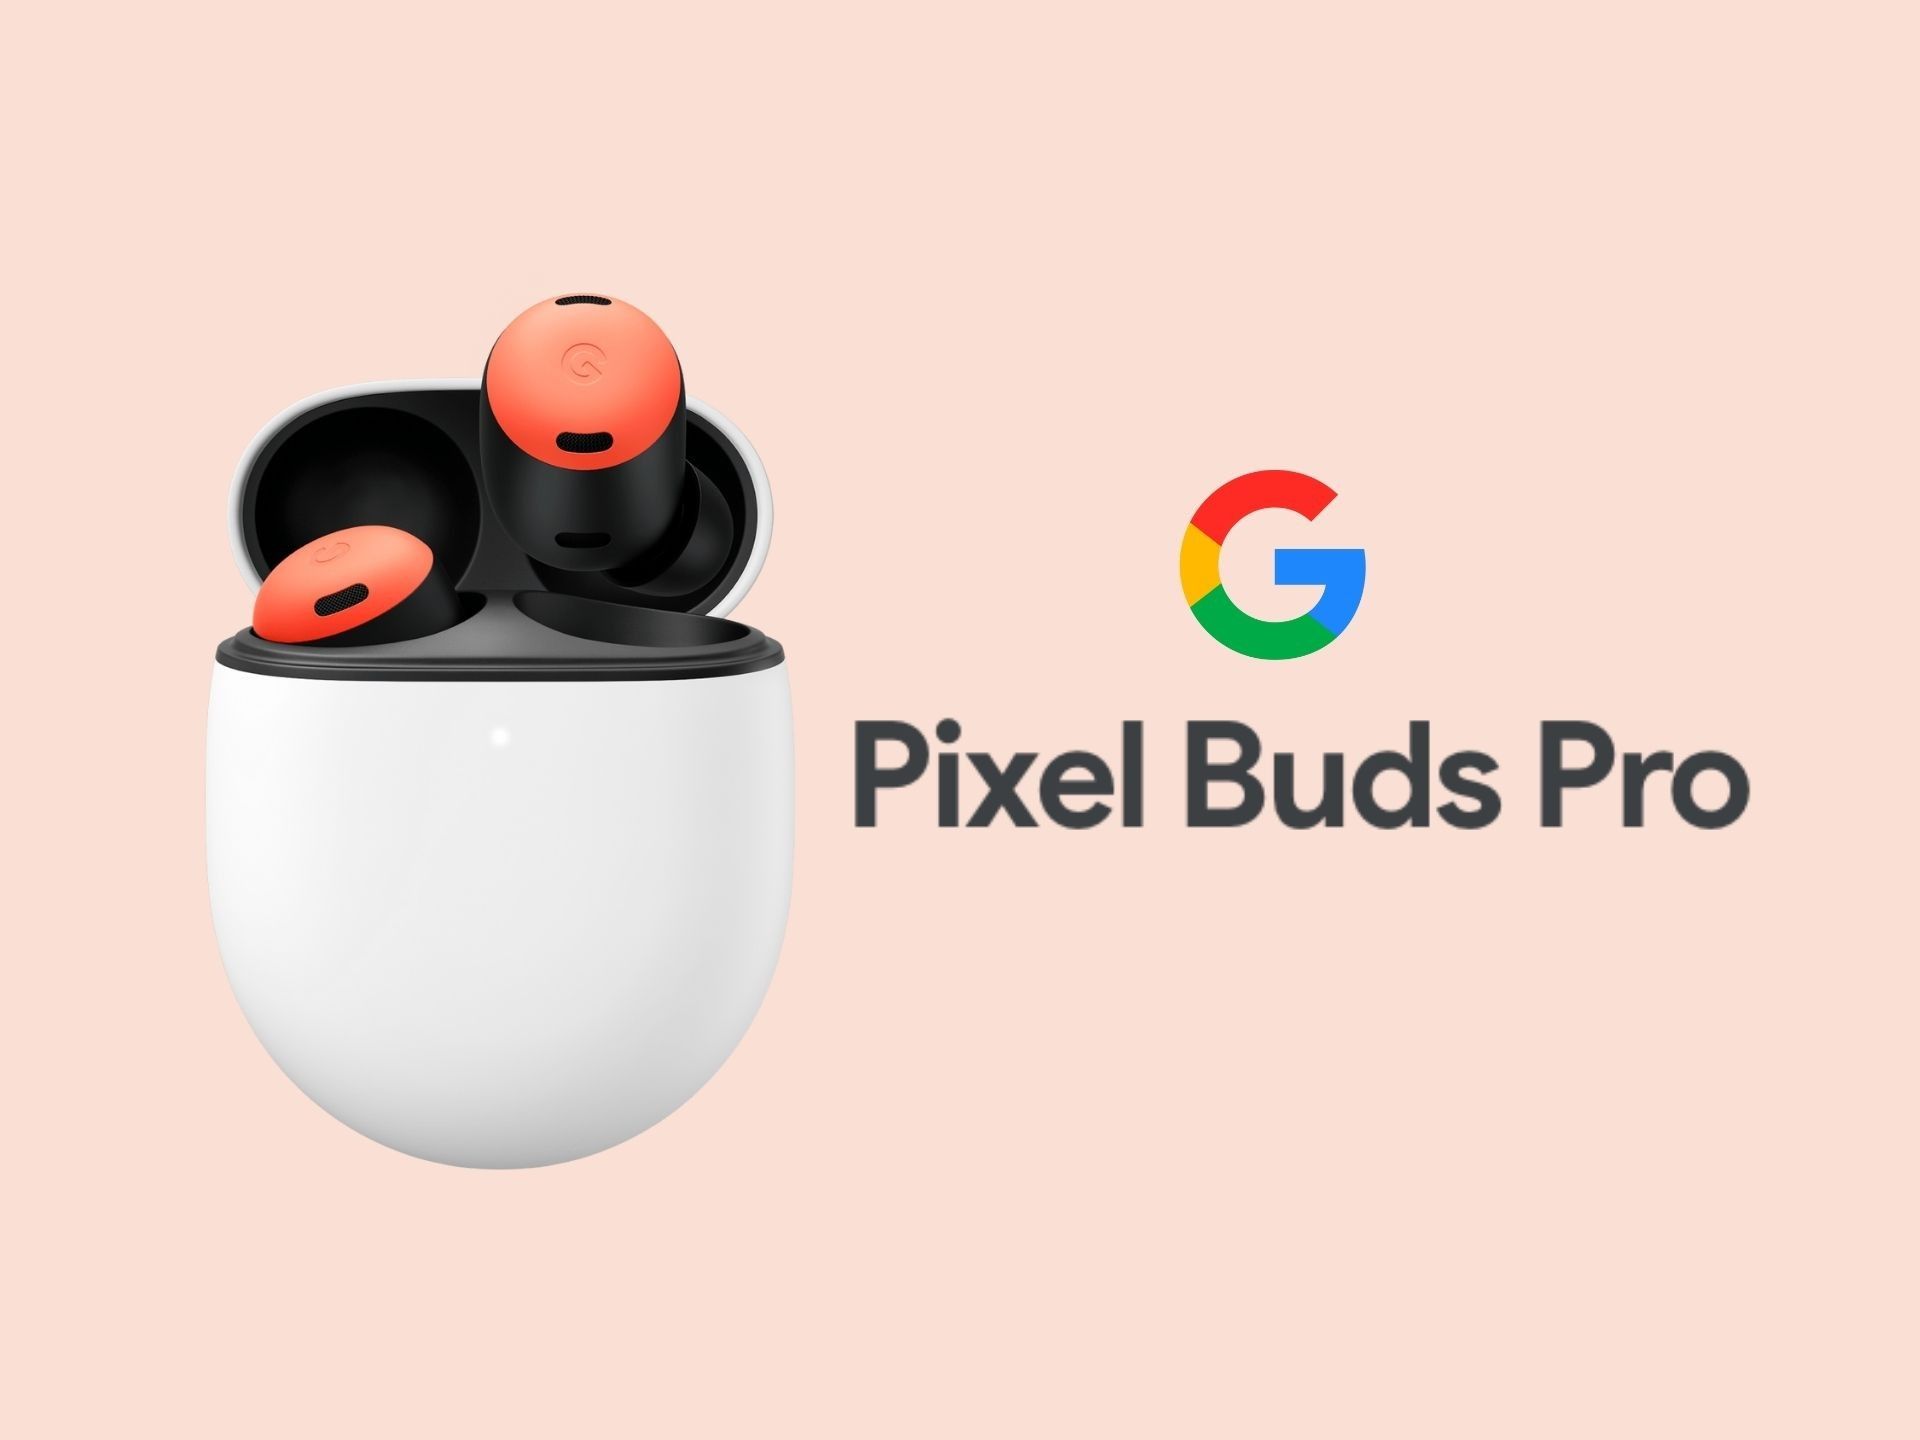 Google Pixel Buds Pro is coming, and here's everything we know so far